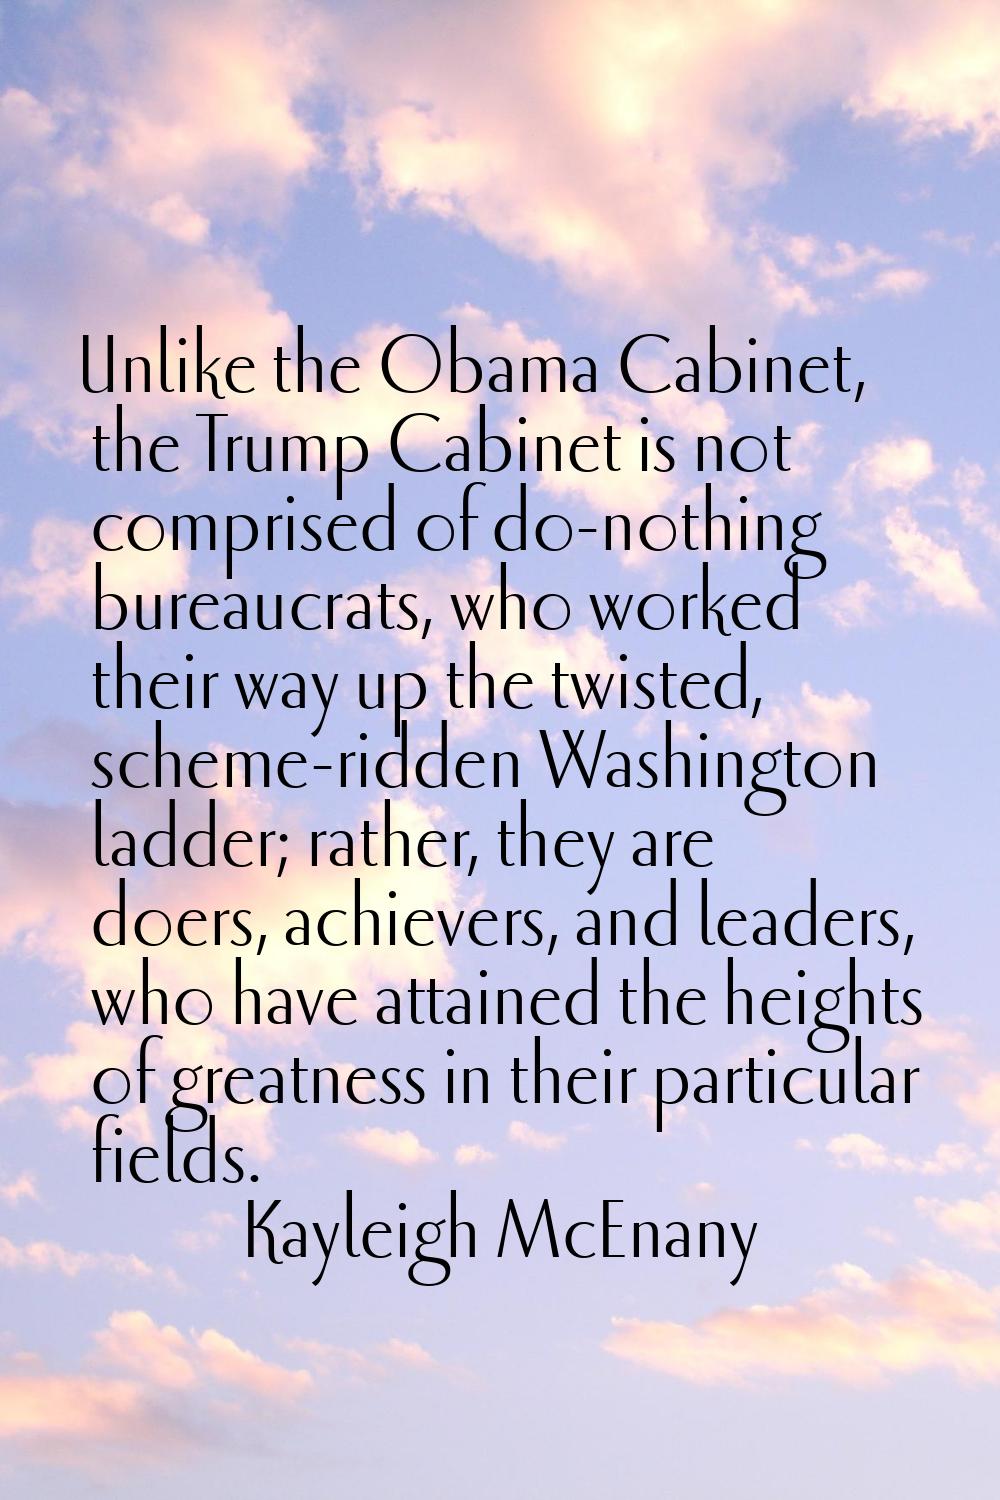 Unlike the Obama Cabinet, the Trump Cabinet is not comprised of do-nothing bureaucrats, who worked 